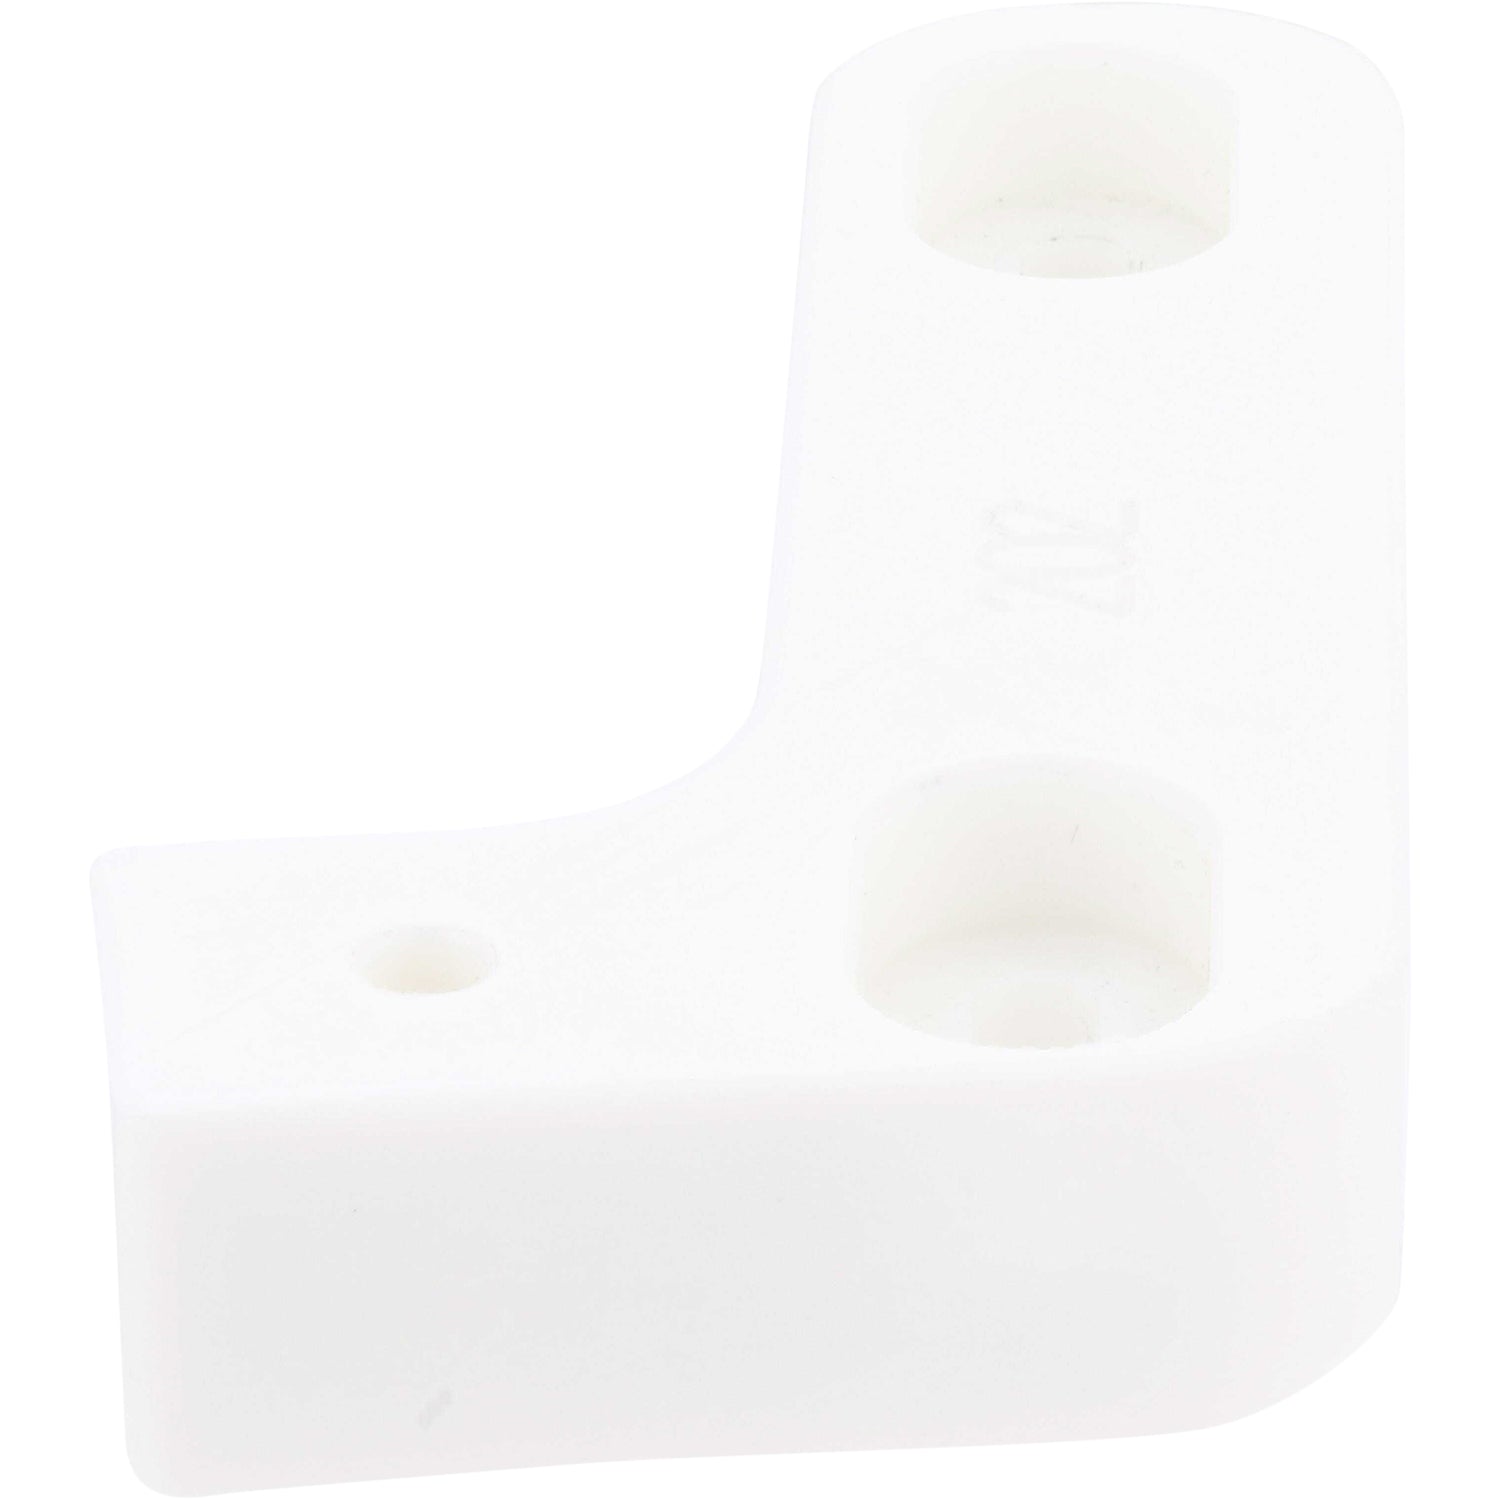 Small 90 degree white plastic rail with two mounting holes. Part shown on white background. 